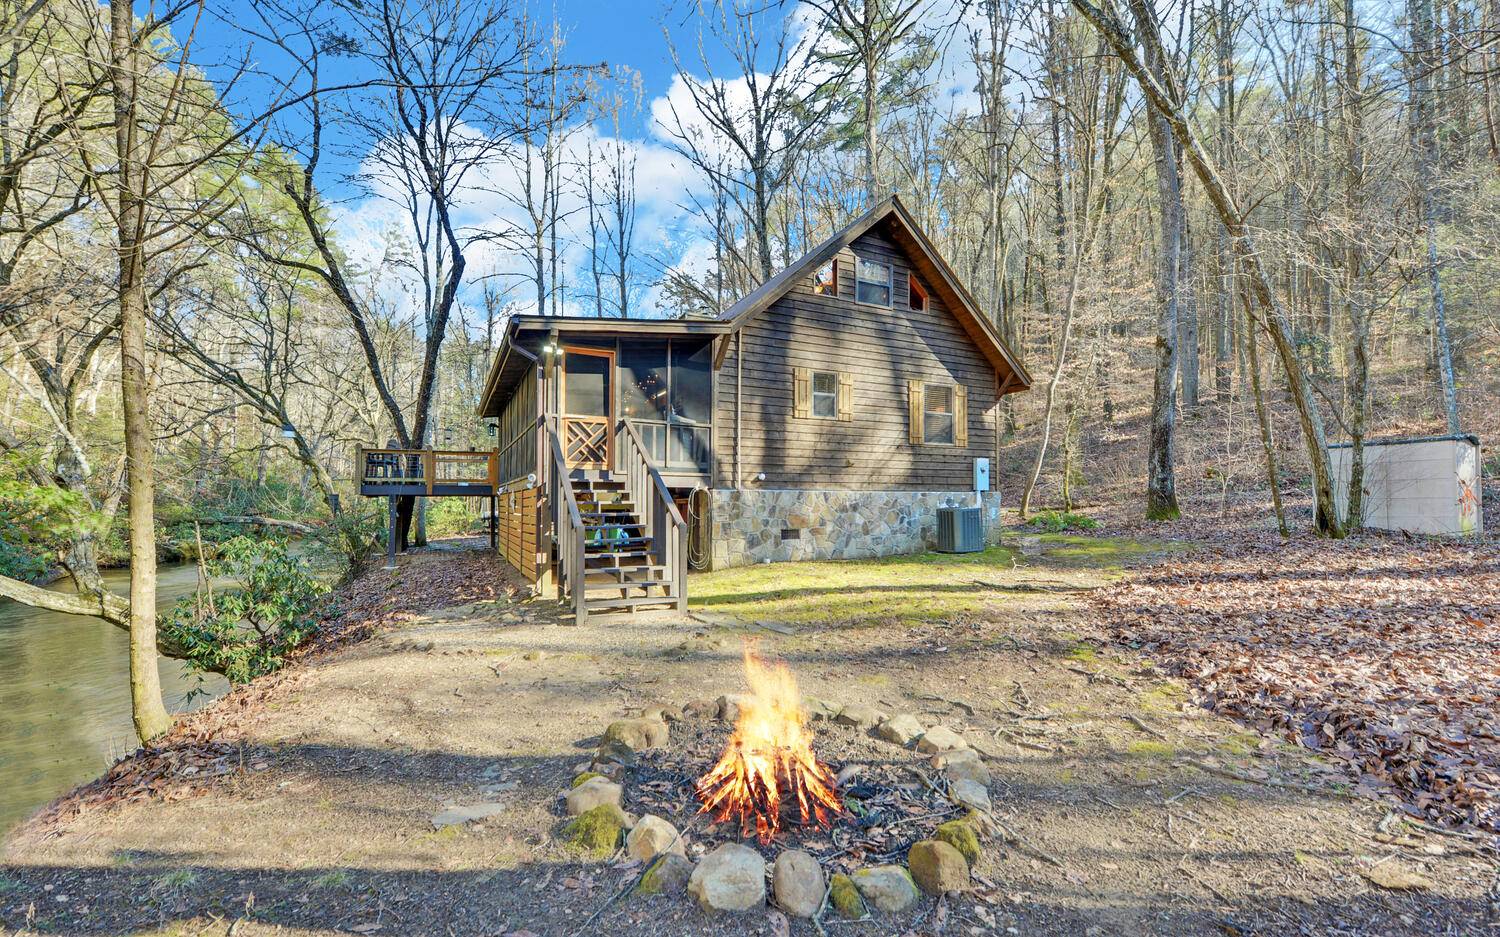 RARE,Gorgeous property on the Toccoa River w/ U.S. National Forest Boundary! Upon walking into this furnished settler's cabin,you will feel at home in the great room cozying up next to the wood-burning insert,Soaring wood ceilings with exposed pine beams.Listen to the rain on metal roof! Wide plank pine floors,large glass door to bring the light in which opens to the over-sized screened-in porch and an open deck at the water's edge.Watch the rainbow trout as you feed them from the deck in a beautifu section of the river with boulders.Only a few easy steps to the water's edge.In the kitchen, you'll find granite counters with lots of cabinets & stainless steel appliances.Master bedroom on the main level,1 Bathroom and Washer/Dryer.Upstairs includes private sleeping loft that overlooks the fireplace. End of the road privacy in a rental friendly neighborhood! Nothing like this available on the Toccoa River!